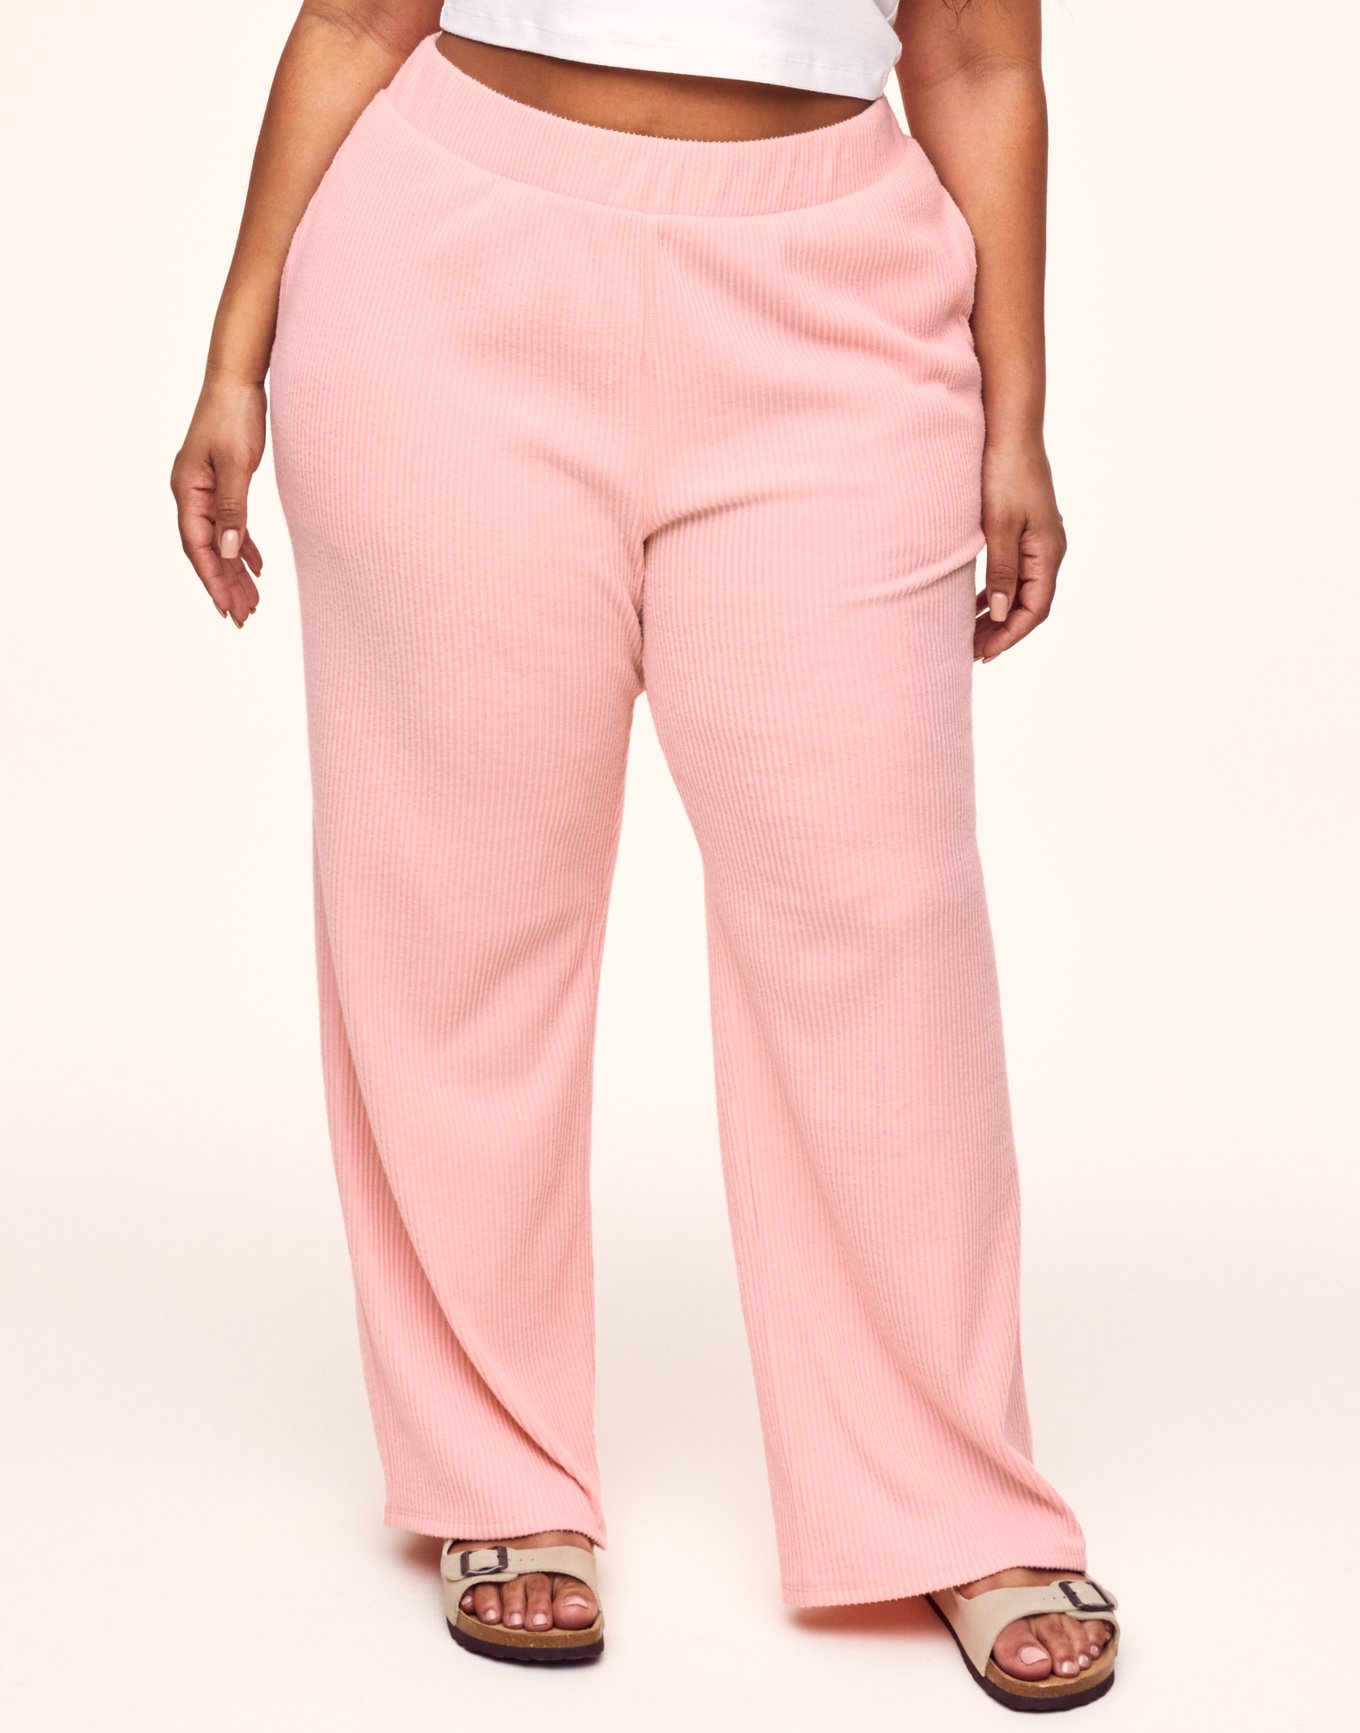 Best Pajamas For Women 2023 - Forbes Vetted